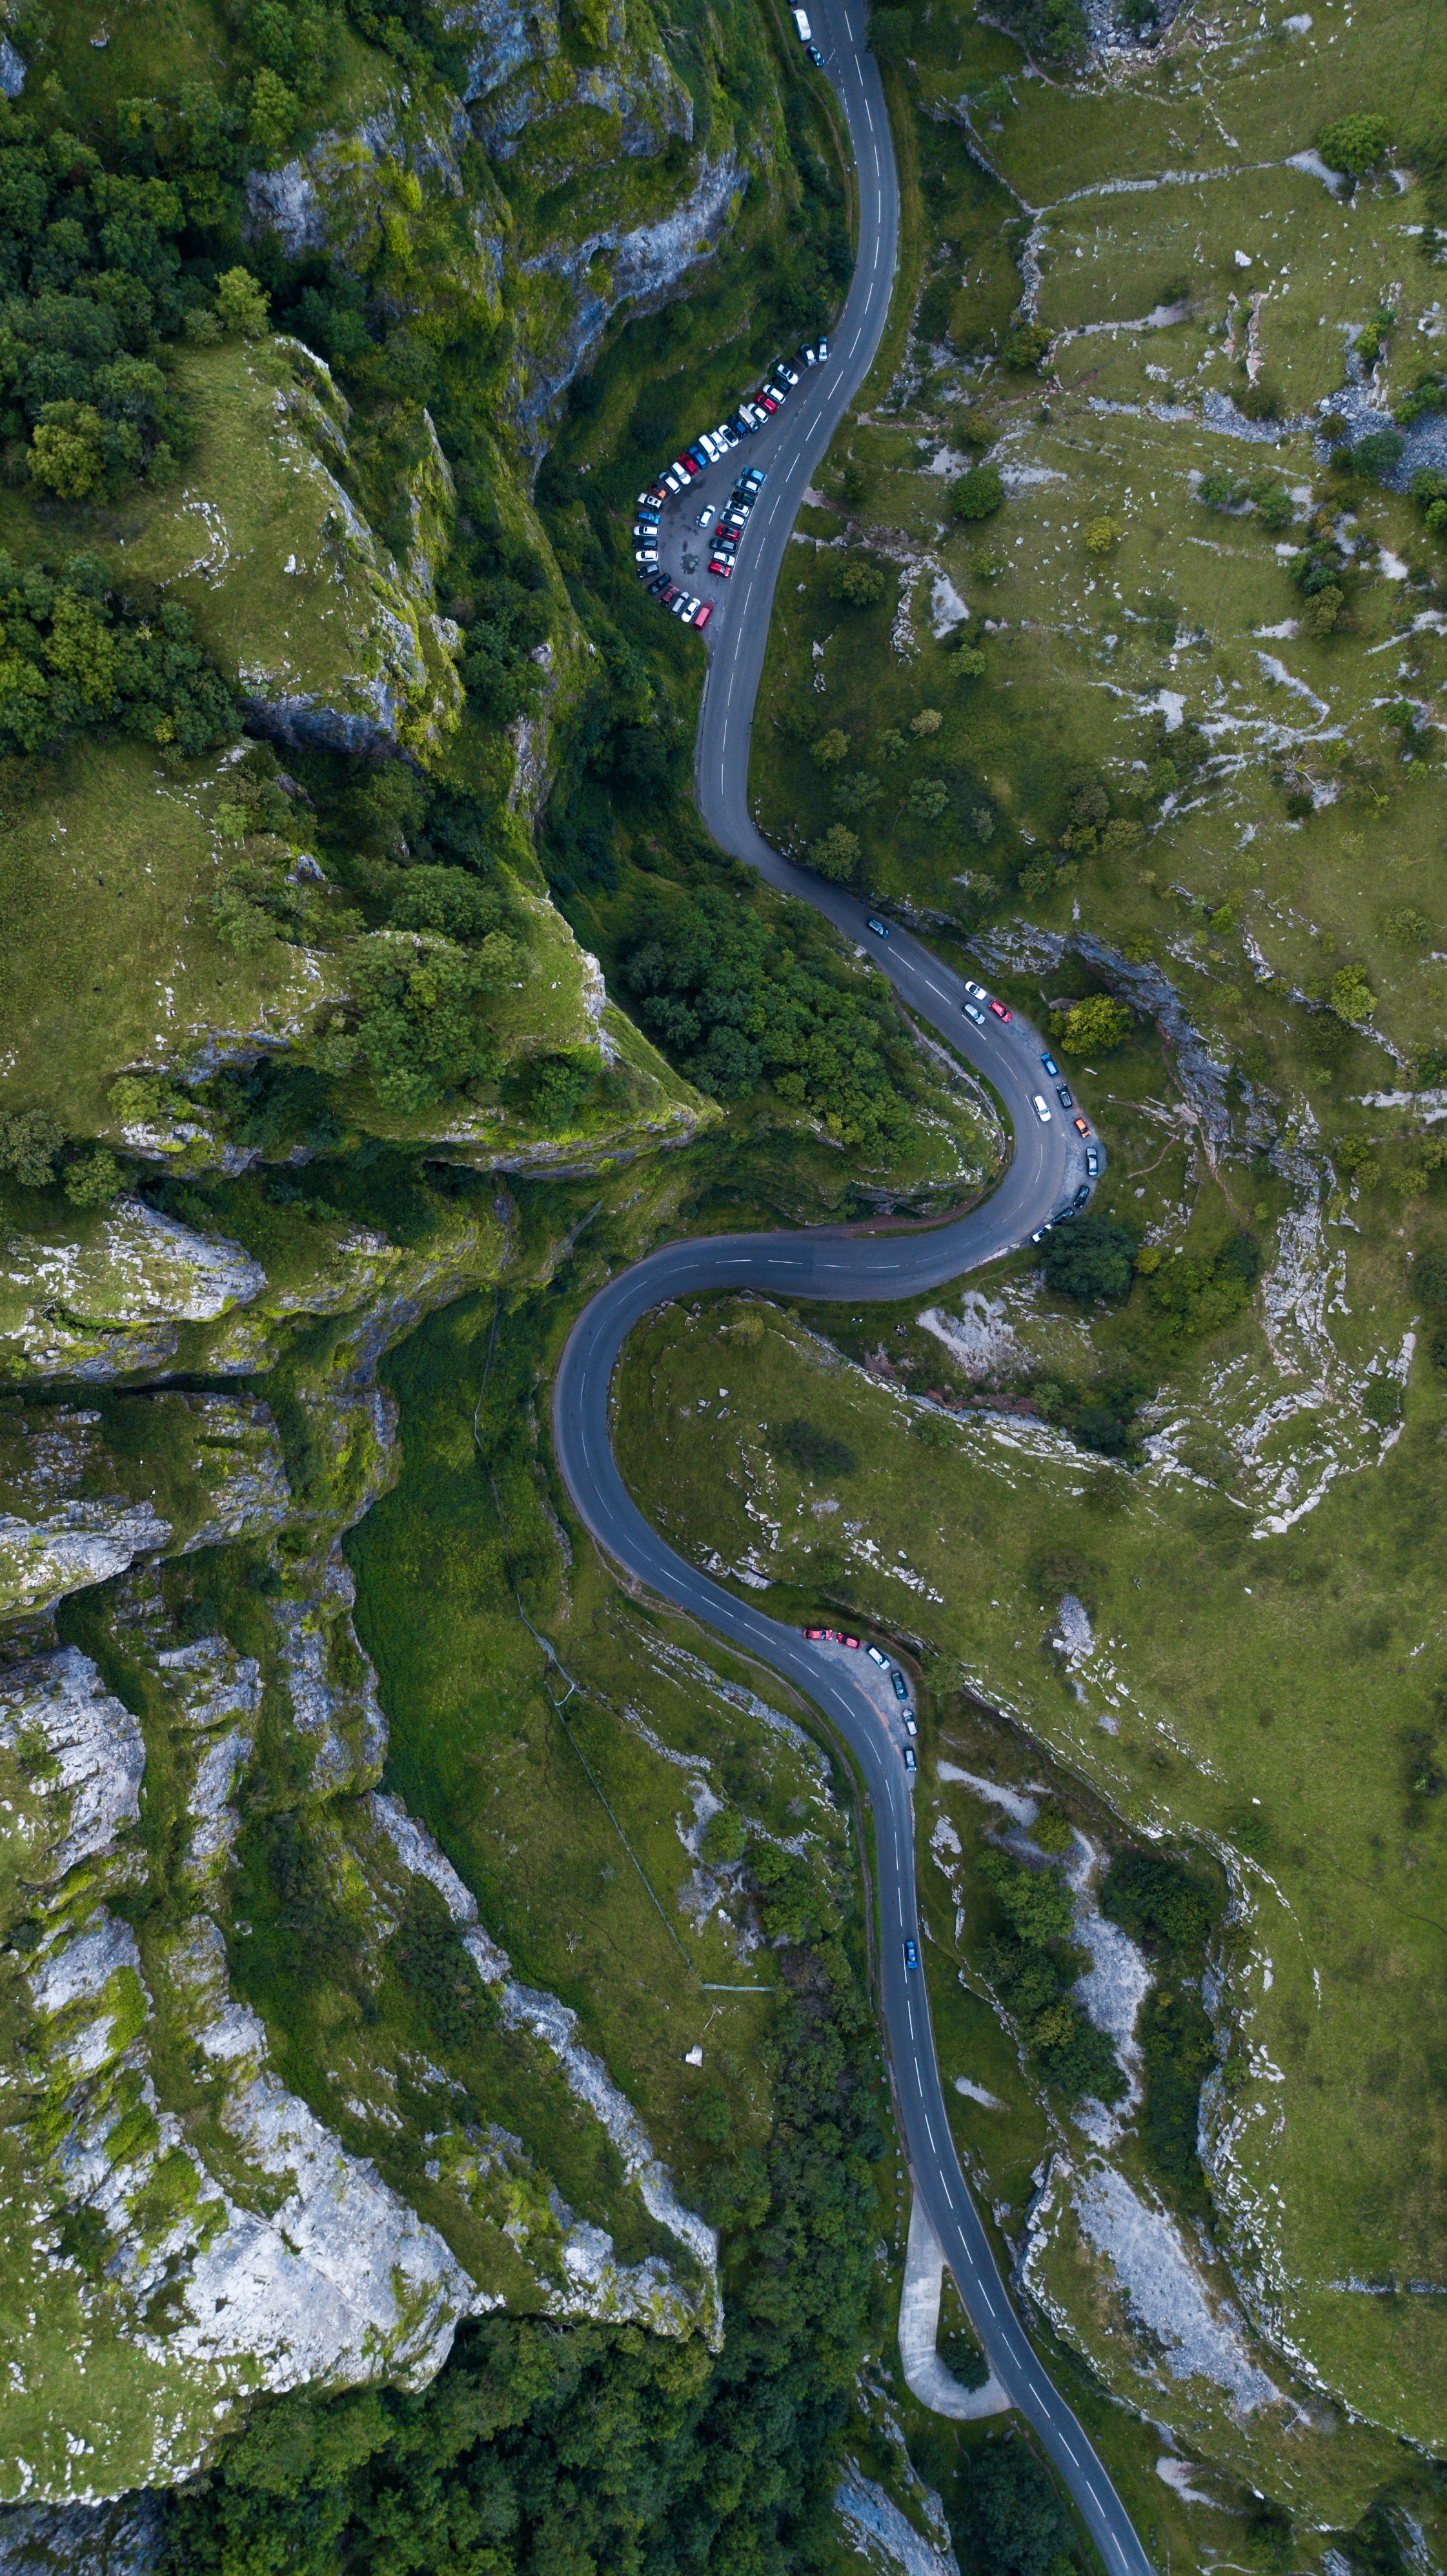 united kingdom, mountains, nature, great britain, cars, view from above, road, winding, sinuous, cheddar mobile wallpaper